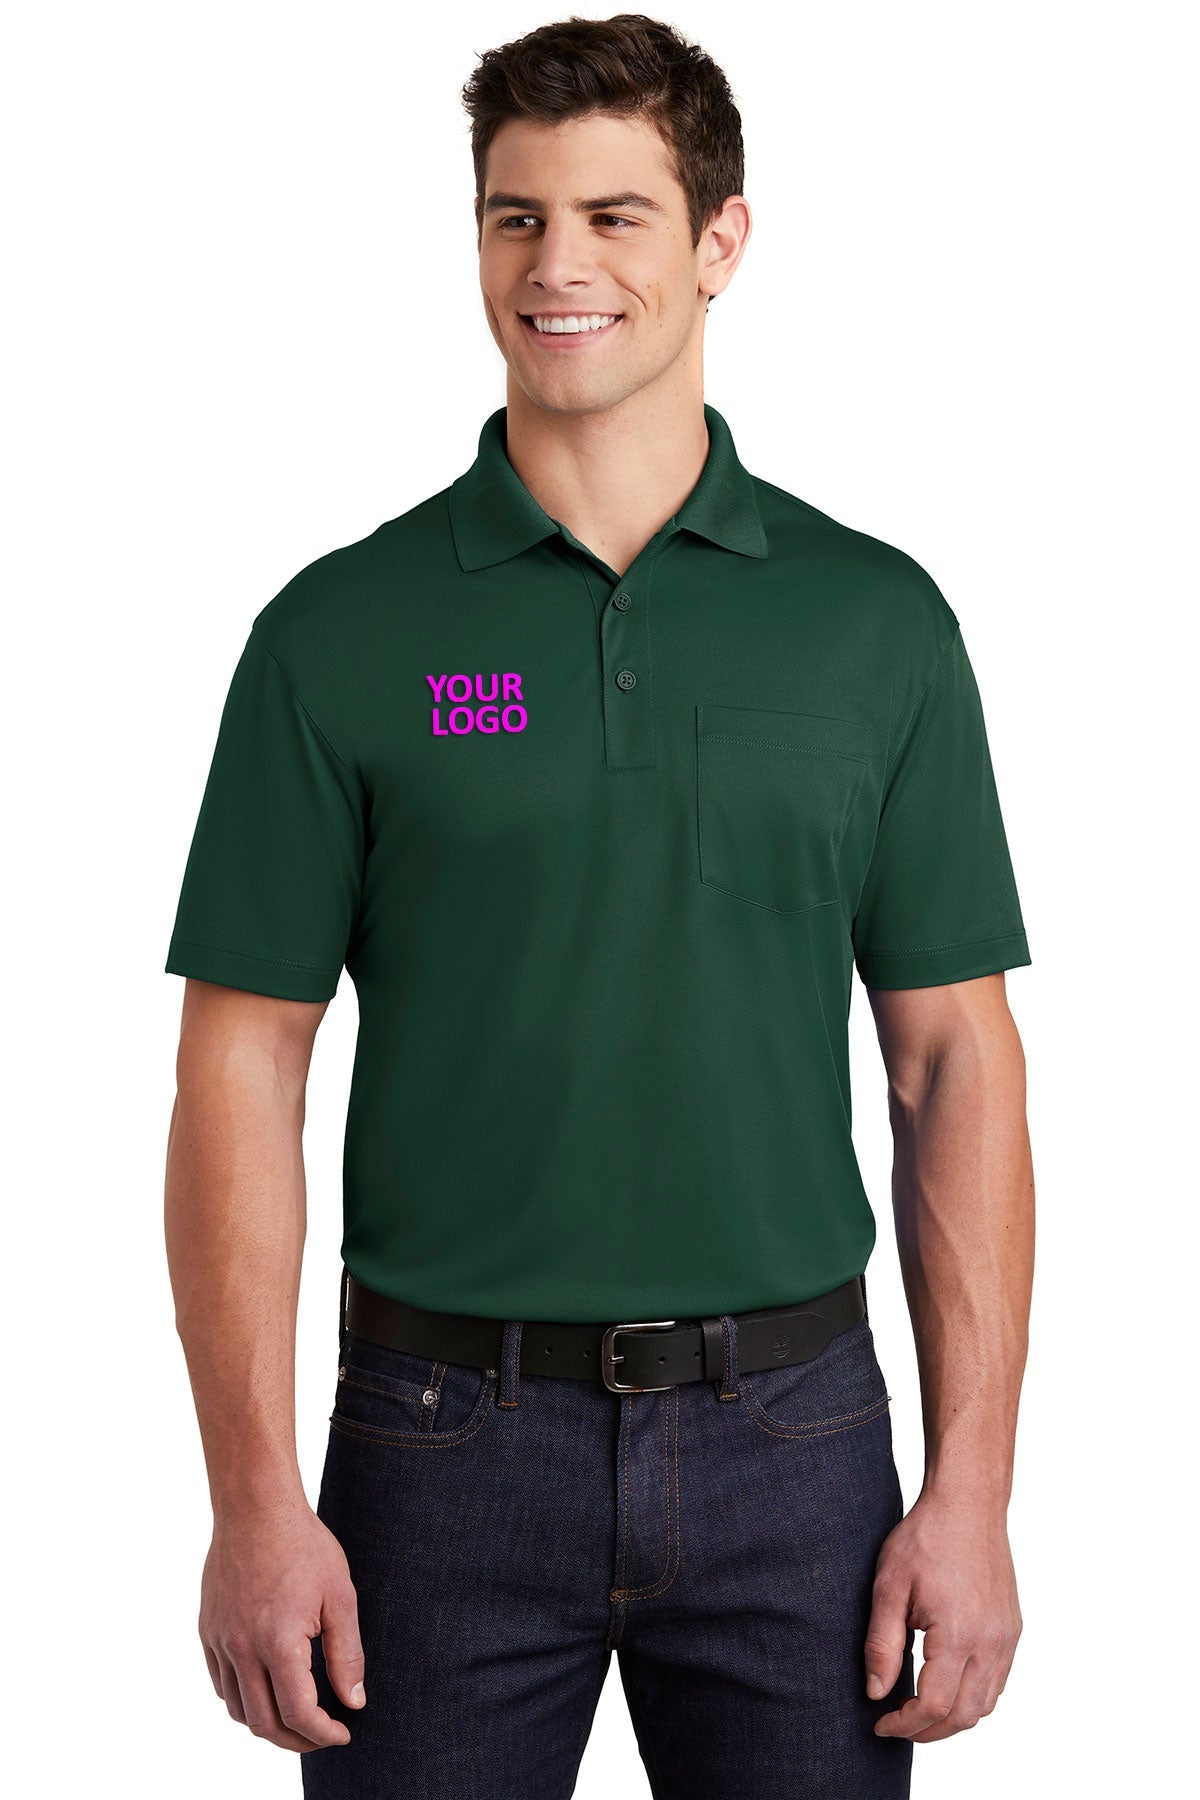 Sport-Tek Forest Green ST651 polo shirts with logos